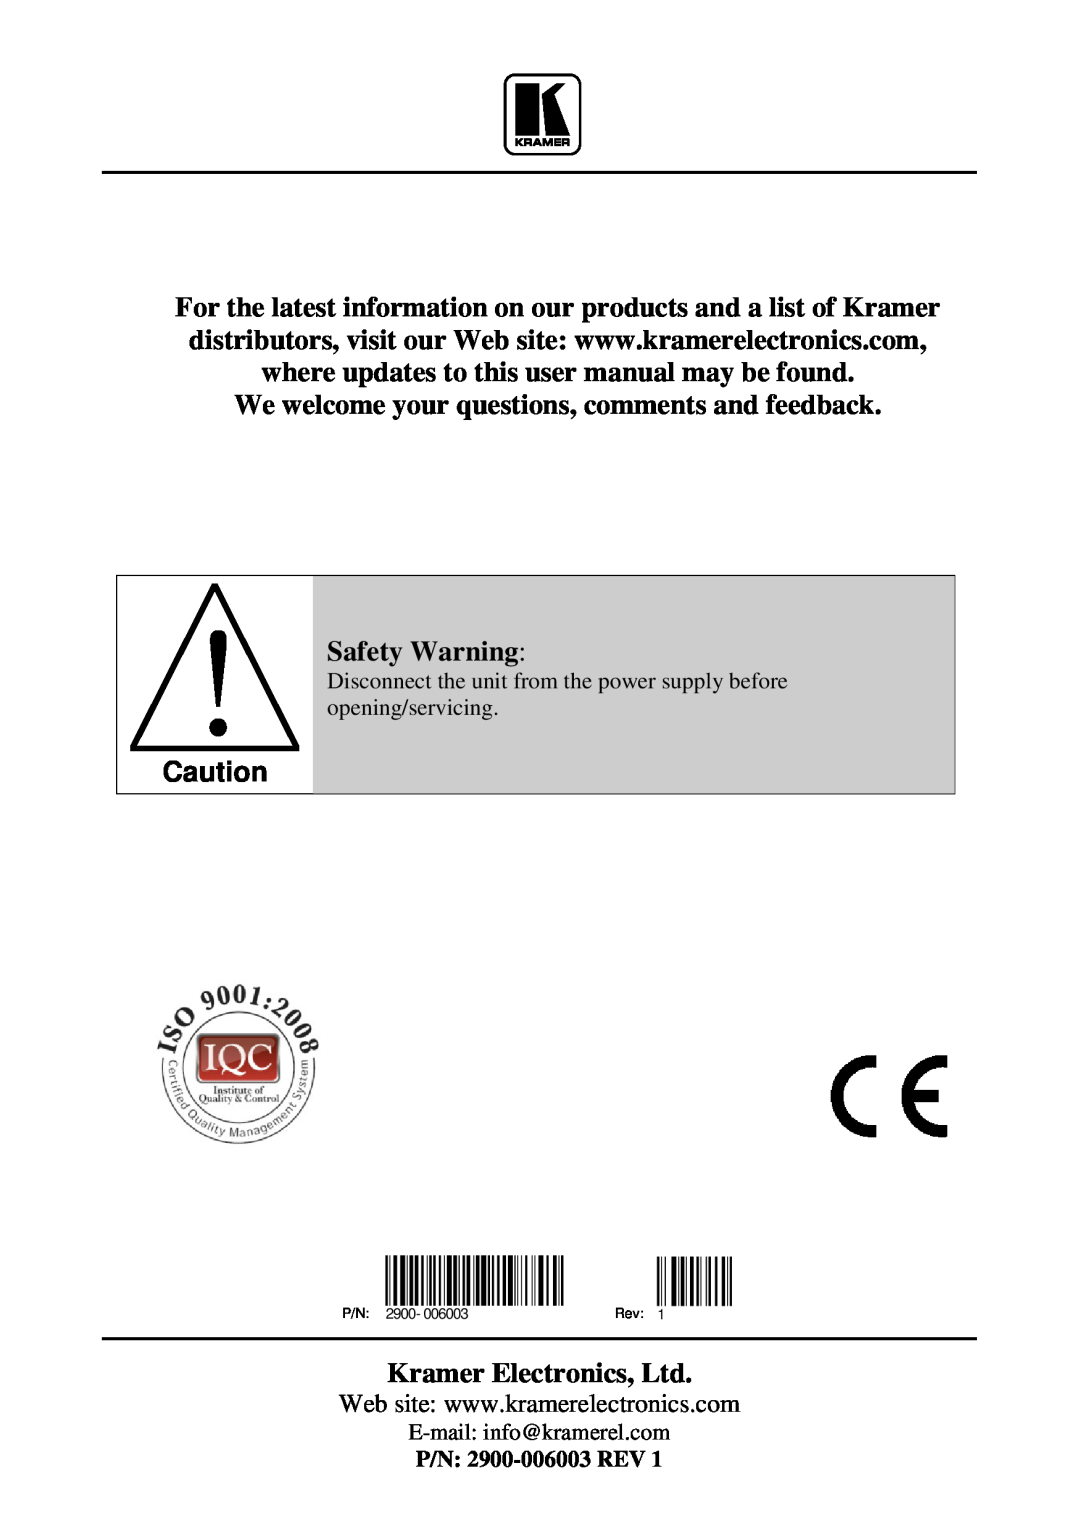 Kramer Electronics 810 manual We welcome your questions, comments and feedback, Safety Warning, P/N 2900-006003REV, Rev 